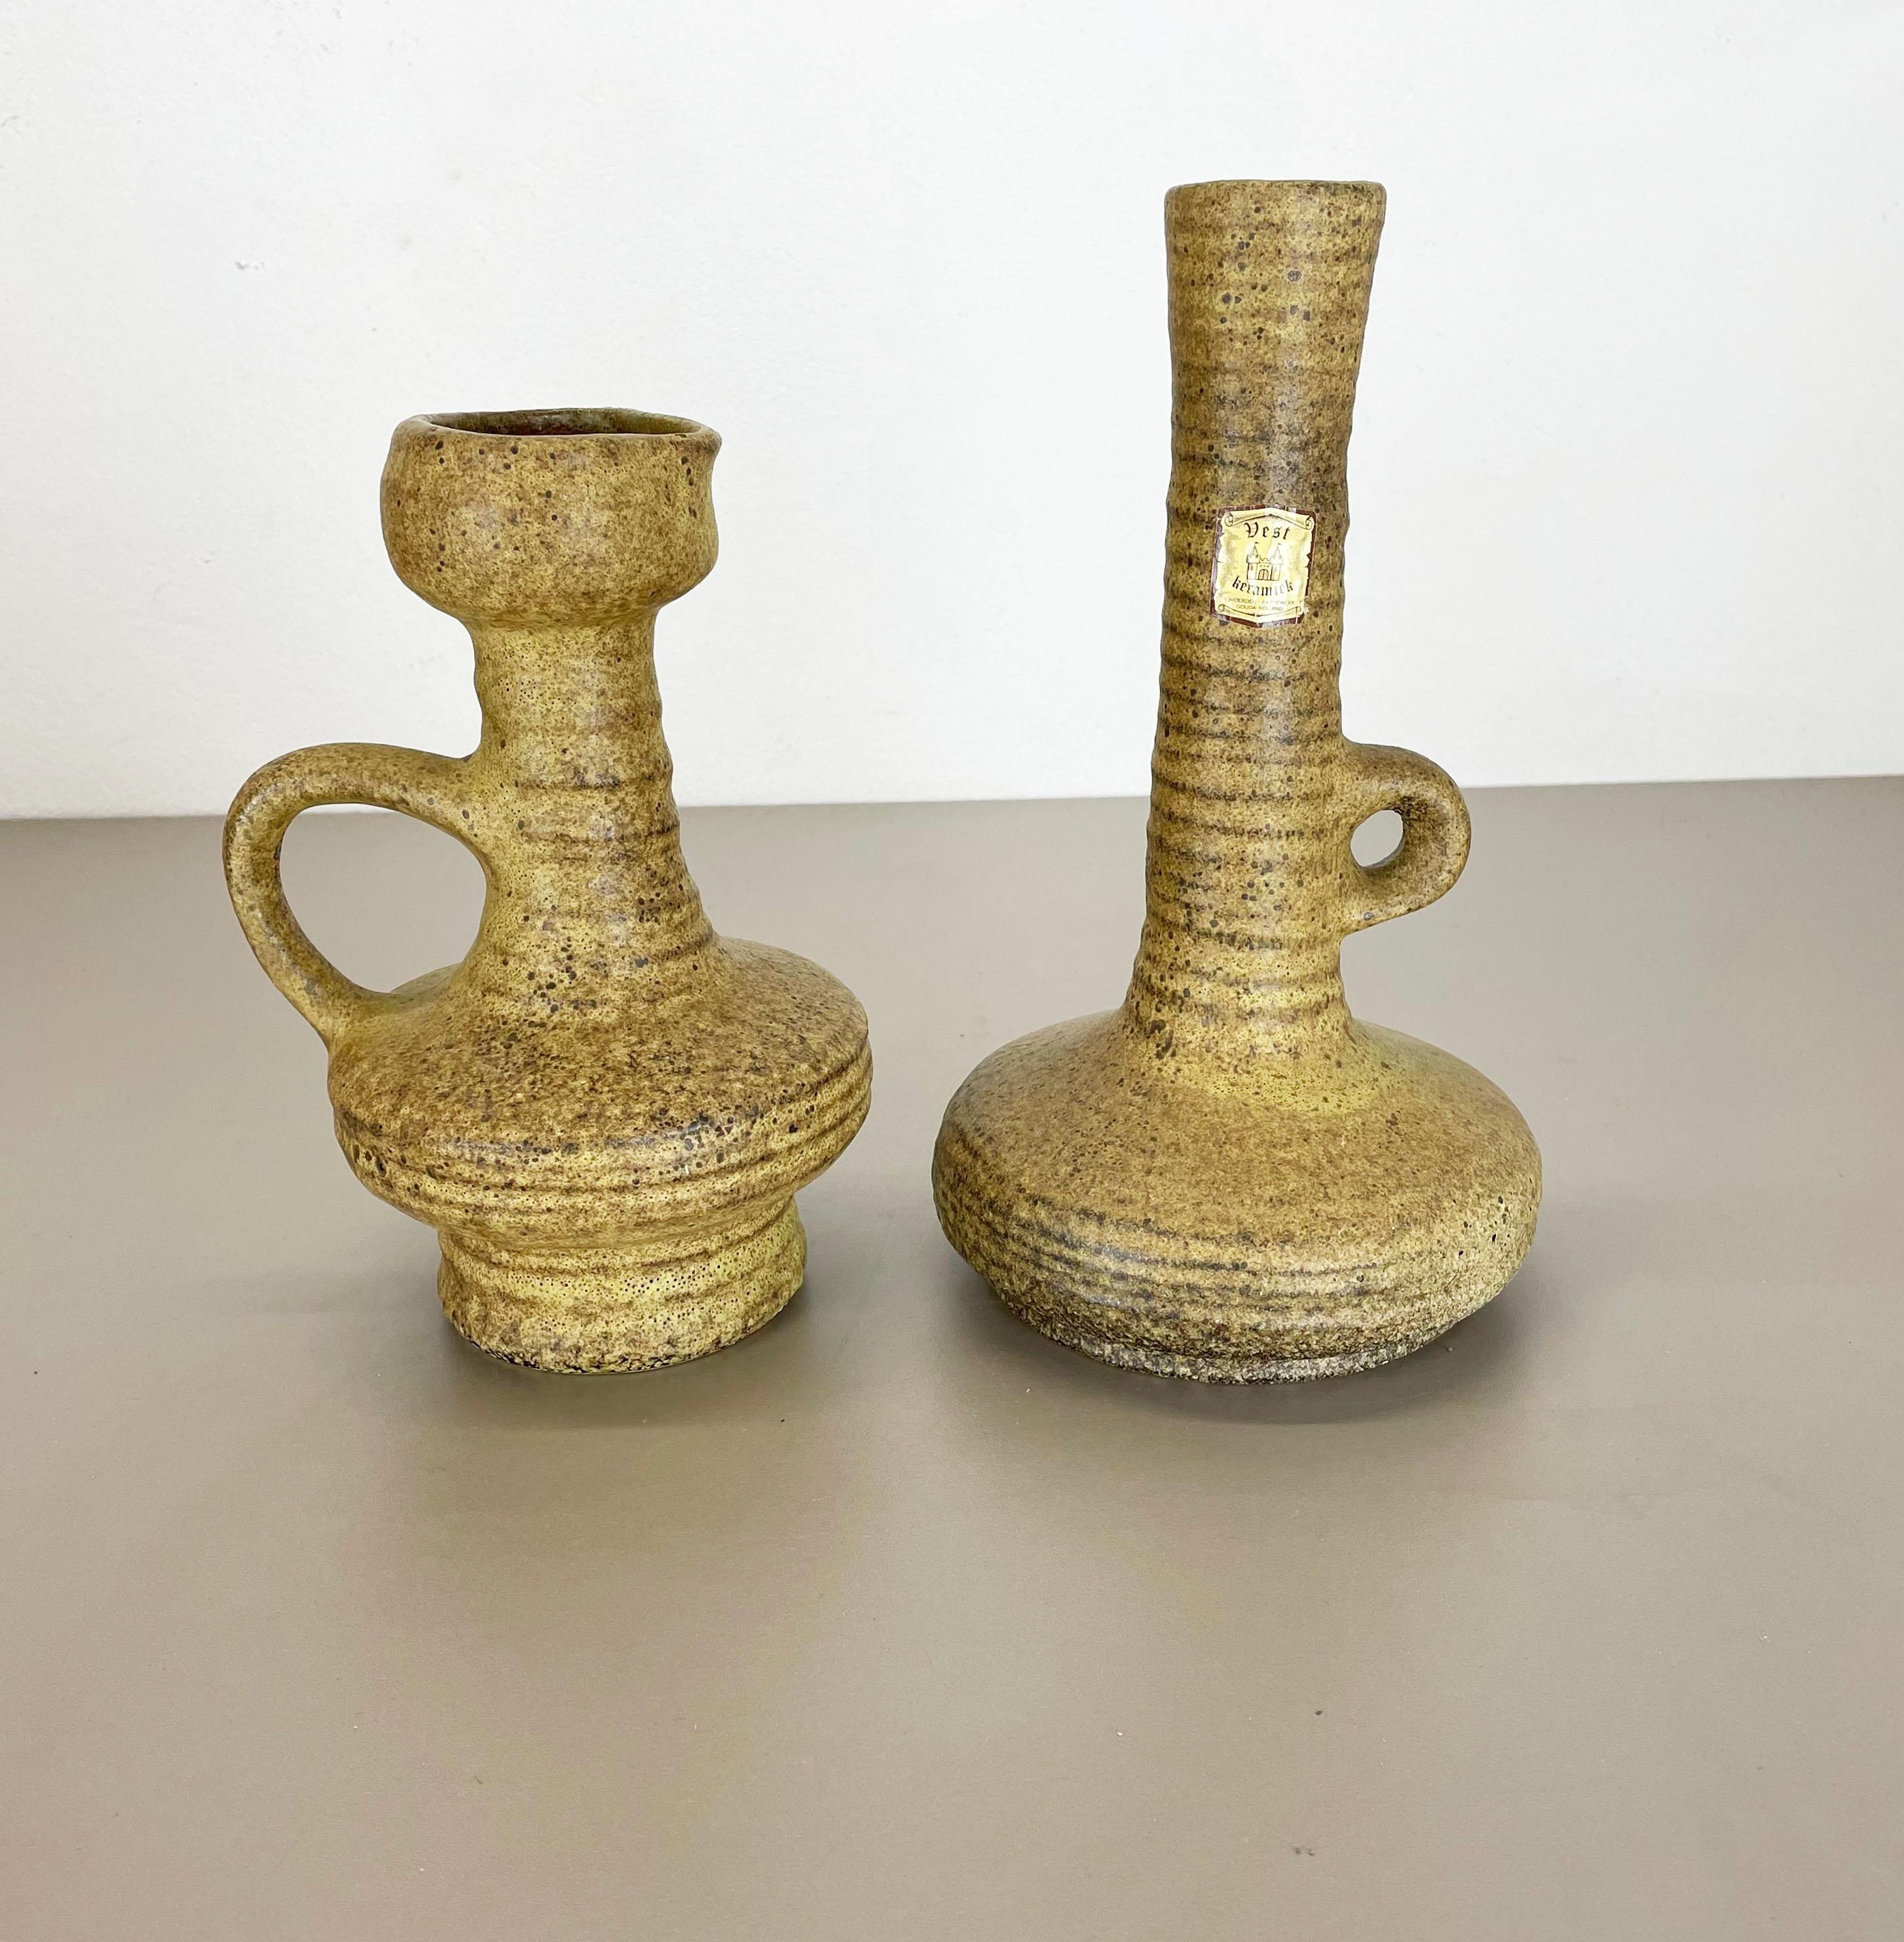 Article:

Ceramic vases set of 2


Producer:

VEST Ceramics, Netherlands



Decade:

1970s



Set of 2 original vintage Studio Pottery vases was produced in the 1970s by Vest Ceramics, Netherlands. it is made of solid ceramic and